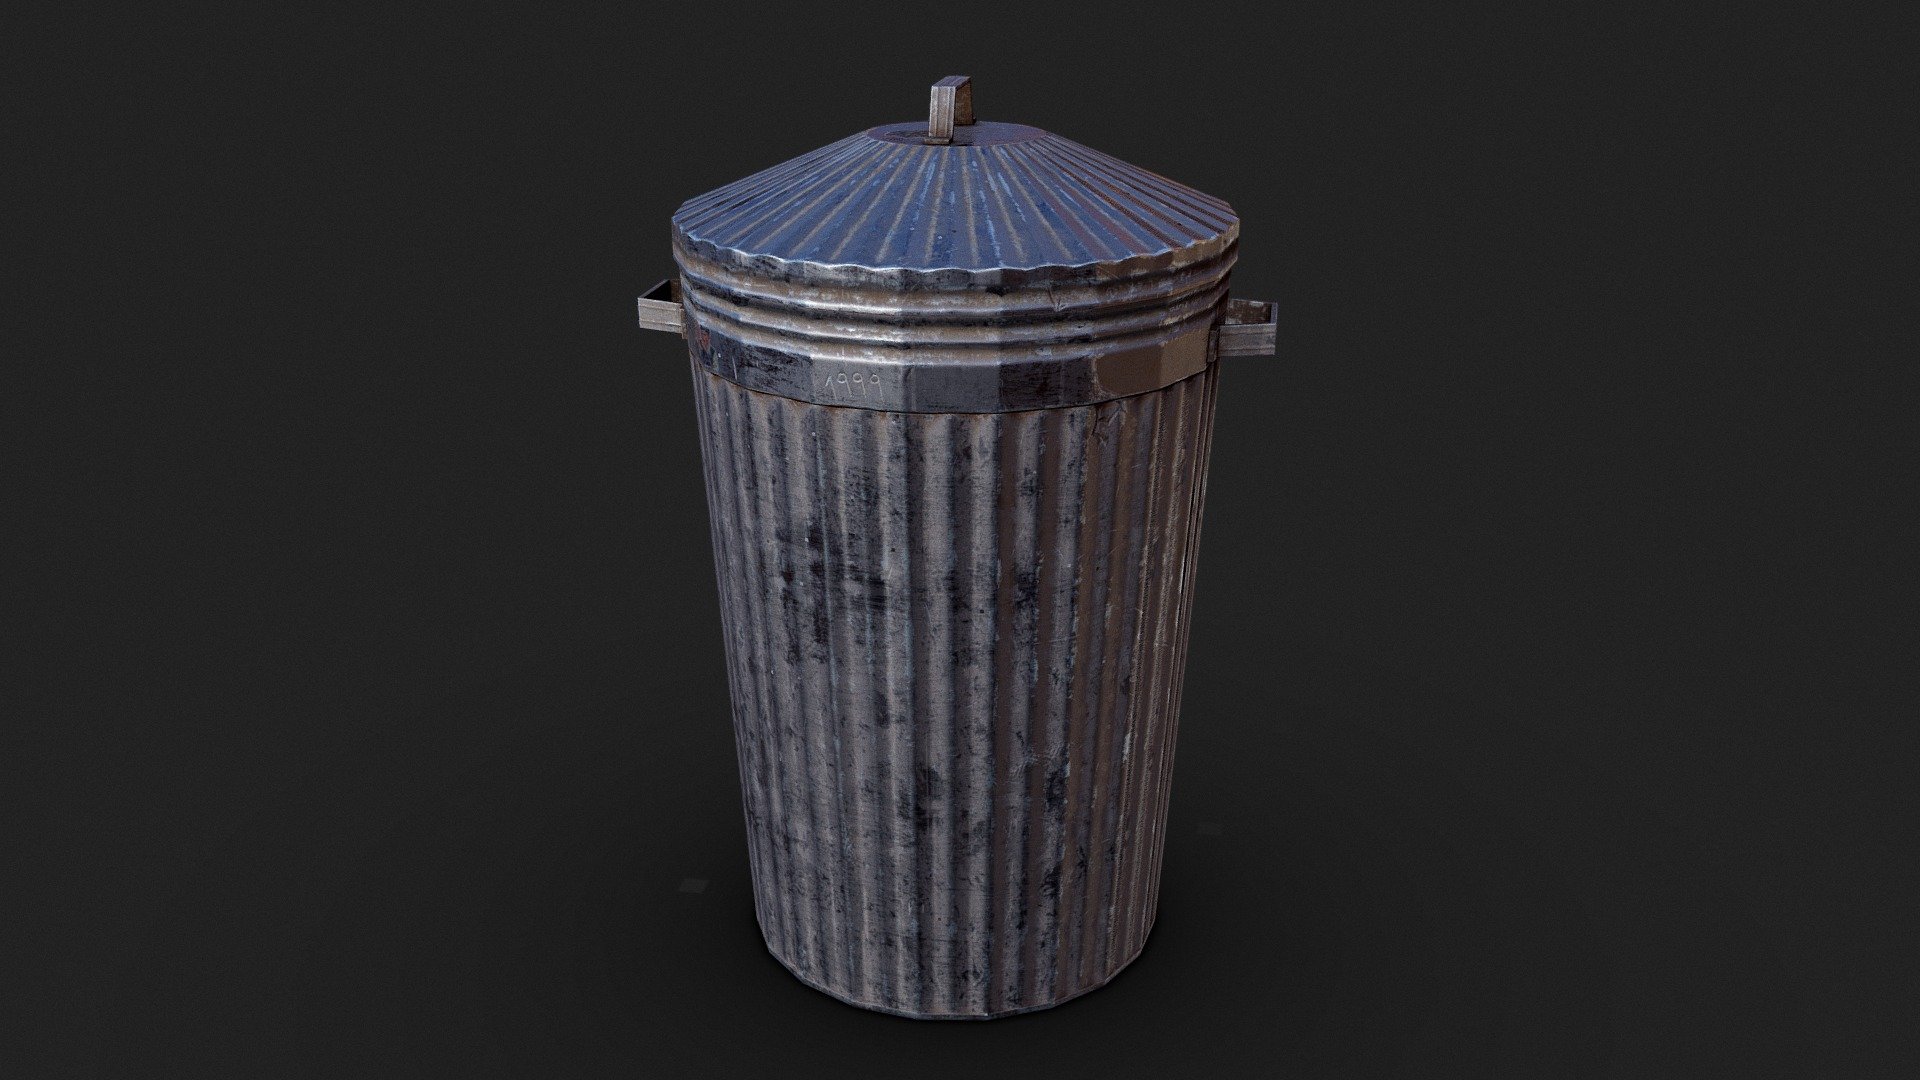 60,800 Trashcan Images, Stock Photos, 3D objects, & Vectors